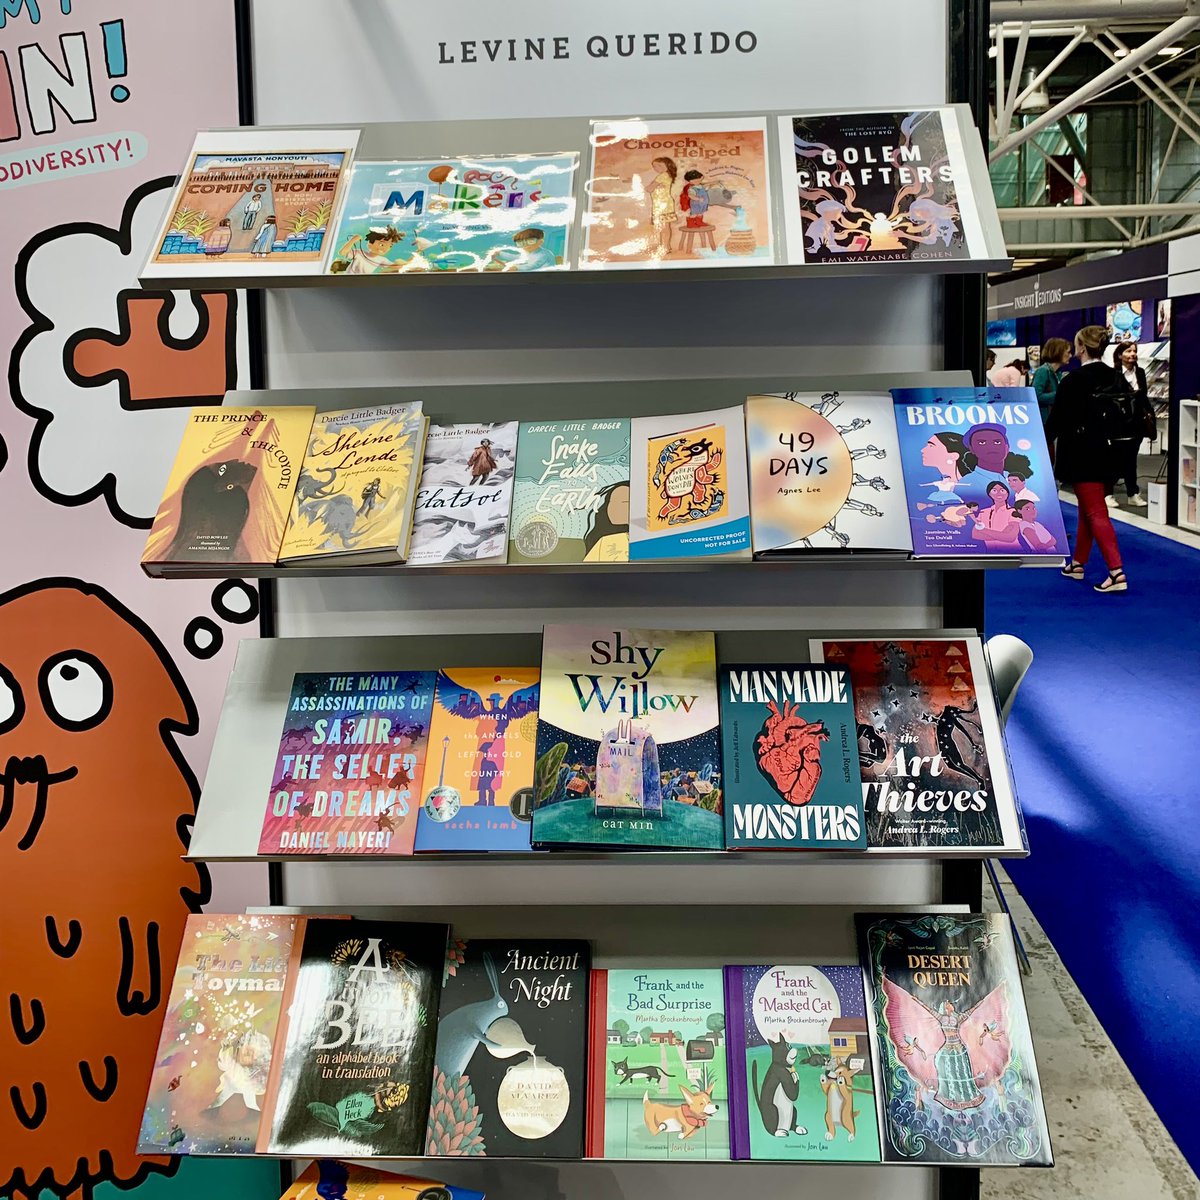 DESERT QUEEN is at the Bologna Book Fair!!!! Thank you to @senickel for snapping this picture!